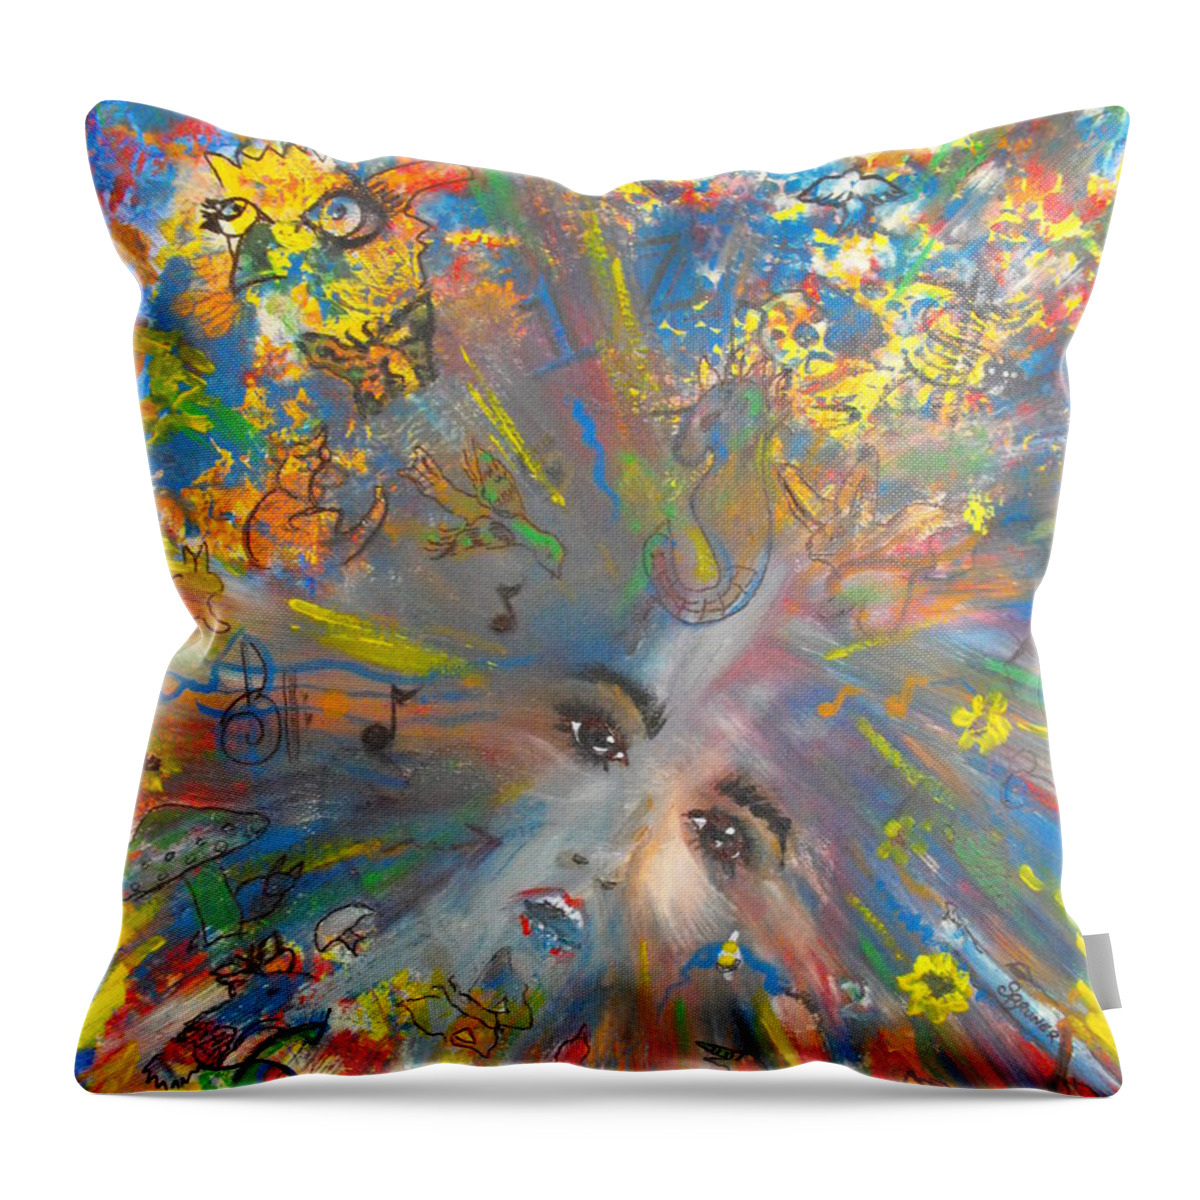 Psychedelic Throw Pillow featuring the painting Tripping by Susan Bruner